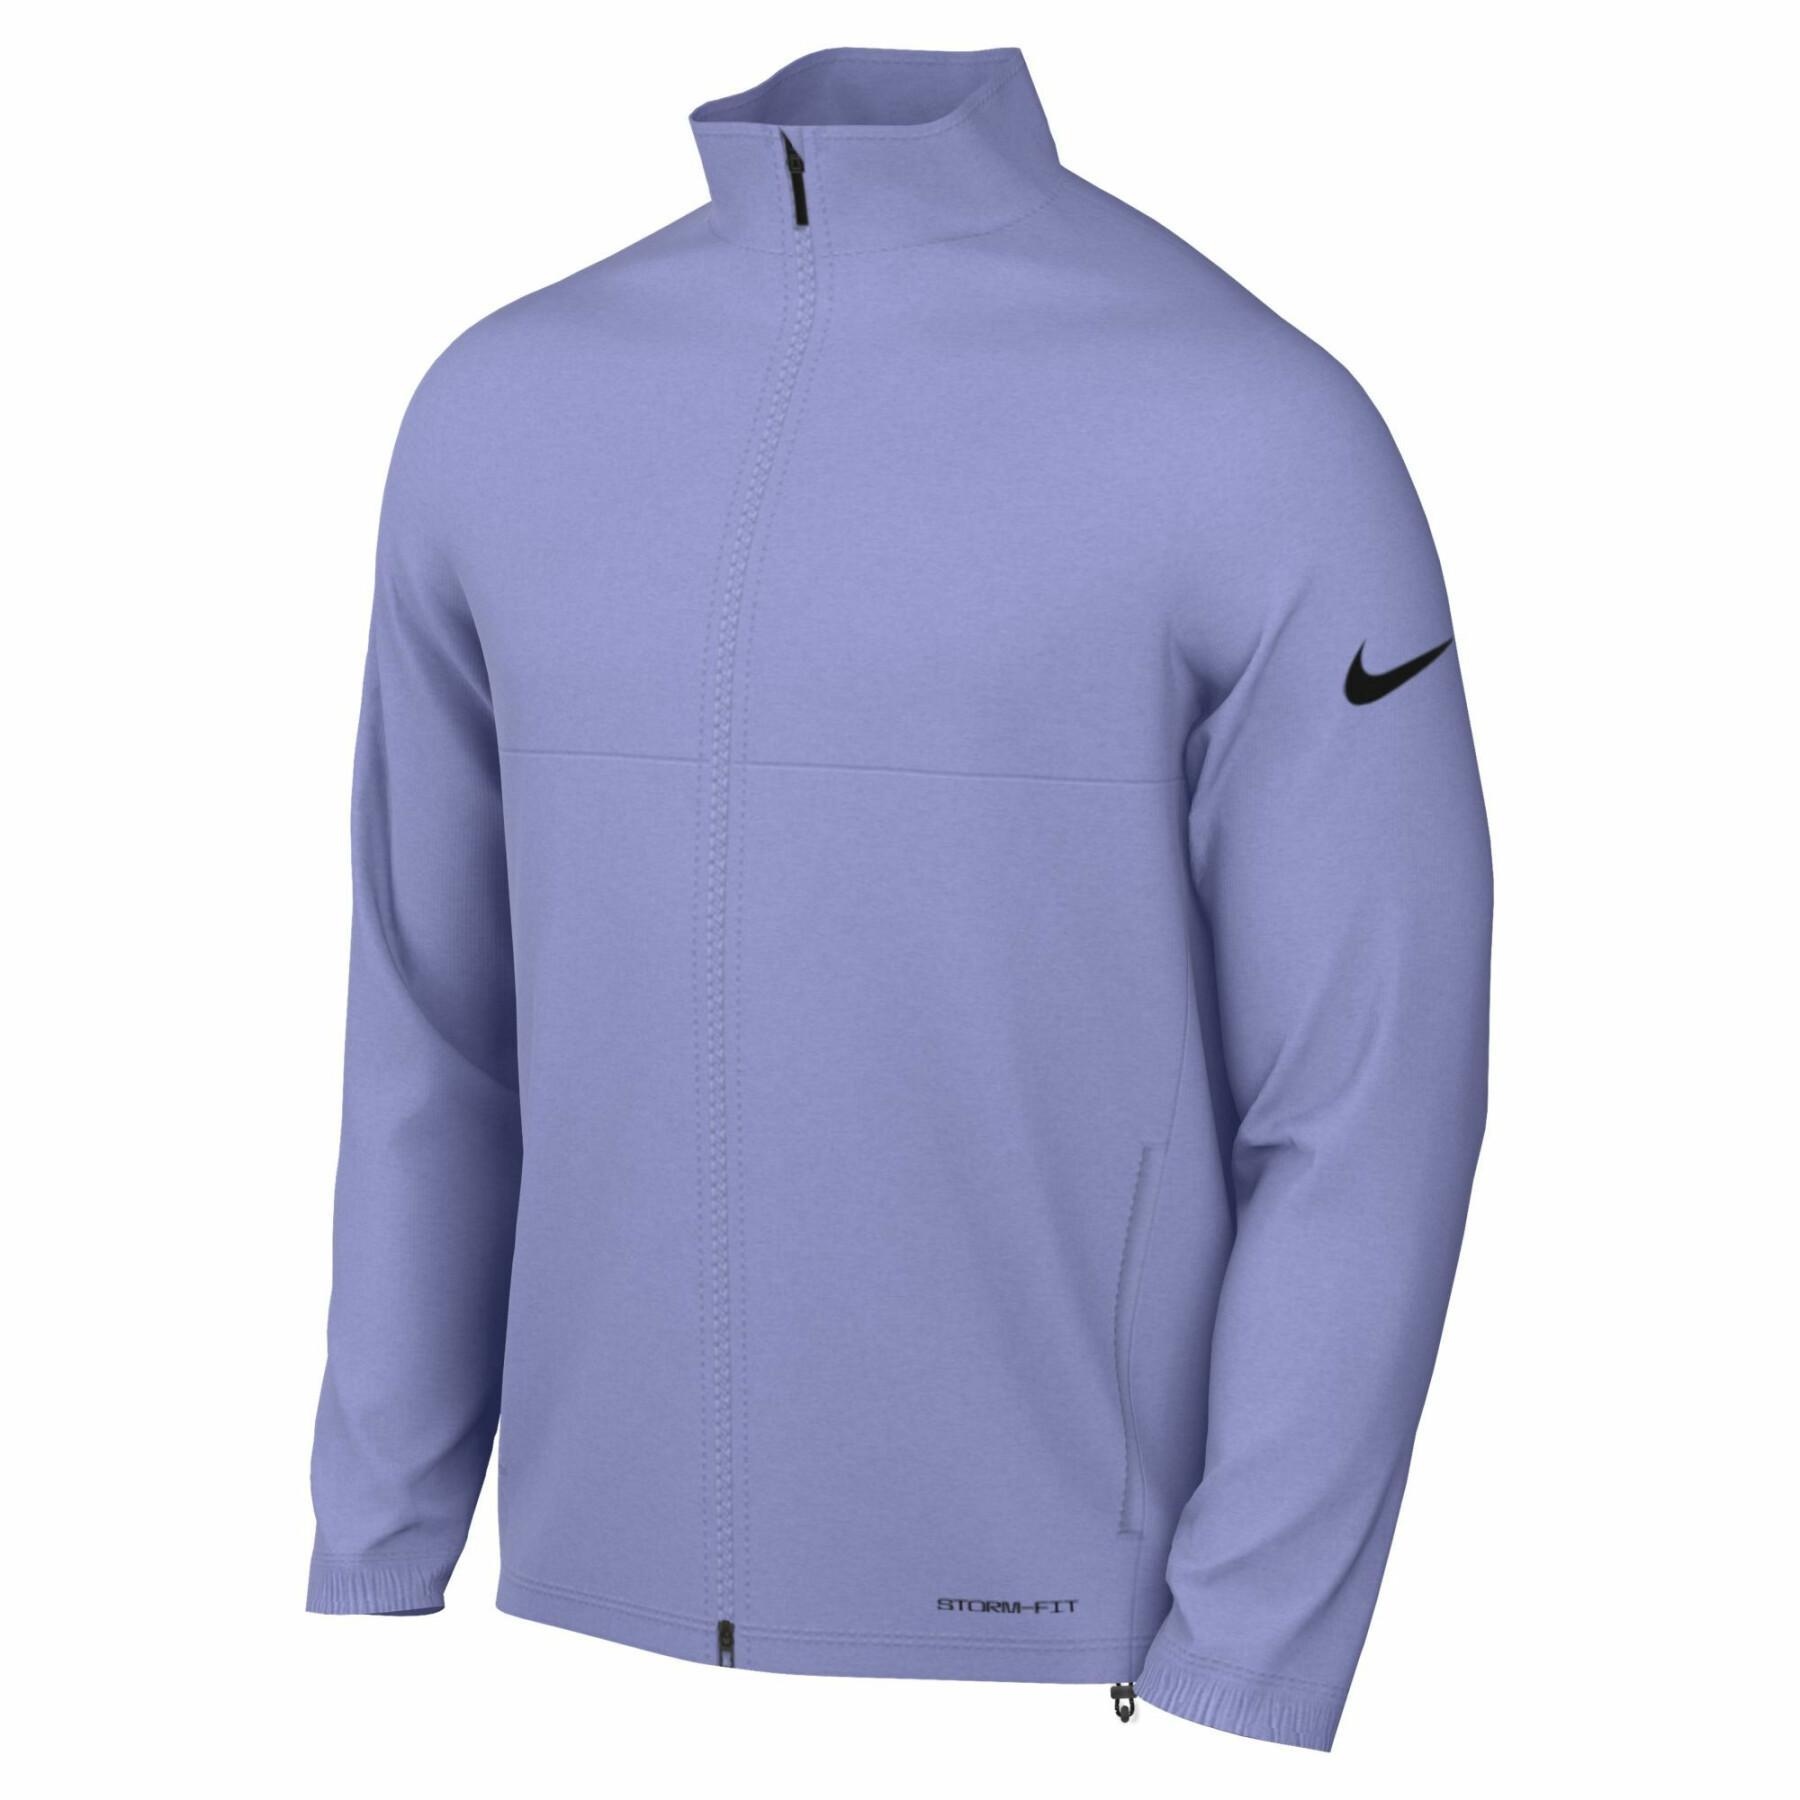 Giacca impermeabile con zip integrale Nike Storm-Fit Victory